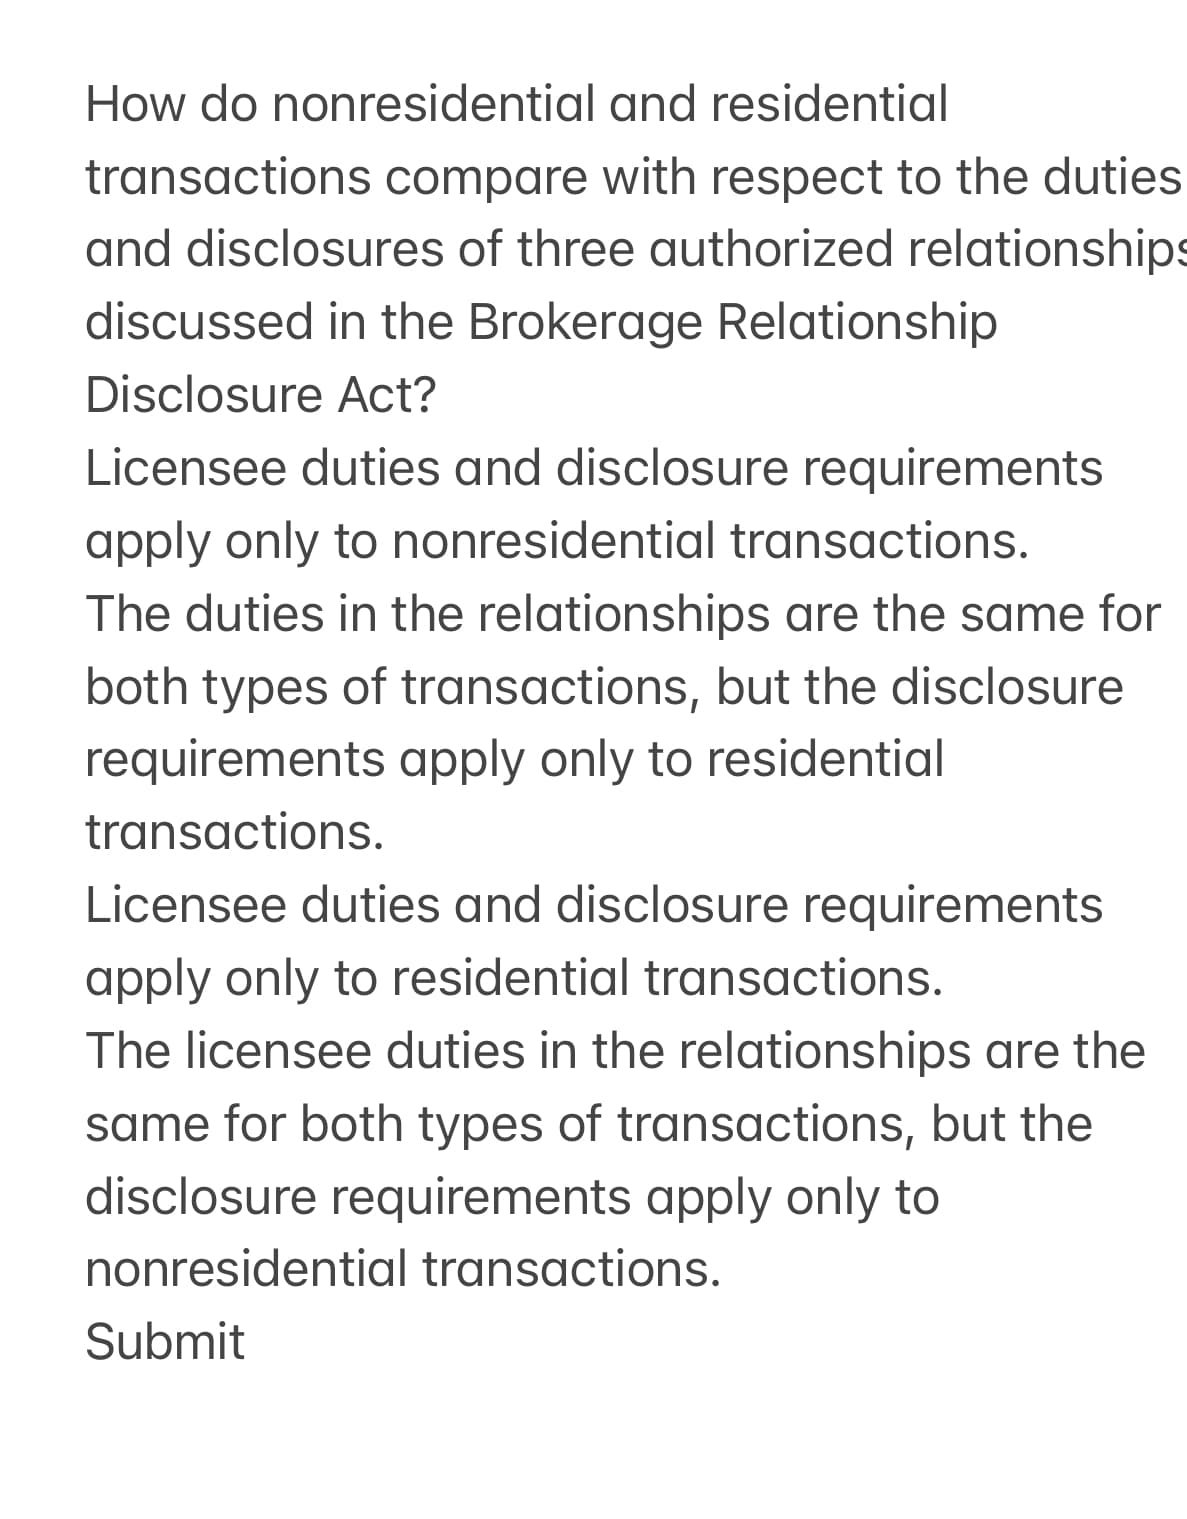 How do nonresidential
and residential
transactions compare with respect to the duties
and disclosures of three authorized relationships
discussed in the Brokerage Relationship
Disclosure Act?
Licensee duties and disclosure requirements
apply only to nonresidential transactions.
The duties in the relationships are the same for
both types of transactions, but the disclosure
requirements apply only to residential
transactions.
Licensee duties and disclosure requirements
apply only to residential transactions.
The licensee duties in the relationships are the
same for both types of transactions, but the
disclosure requirements apply only to
nonresidential transactions.
Submit